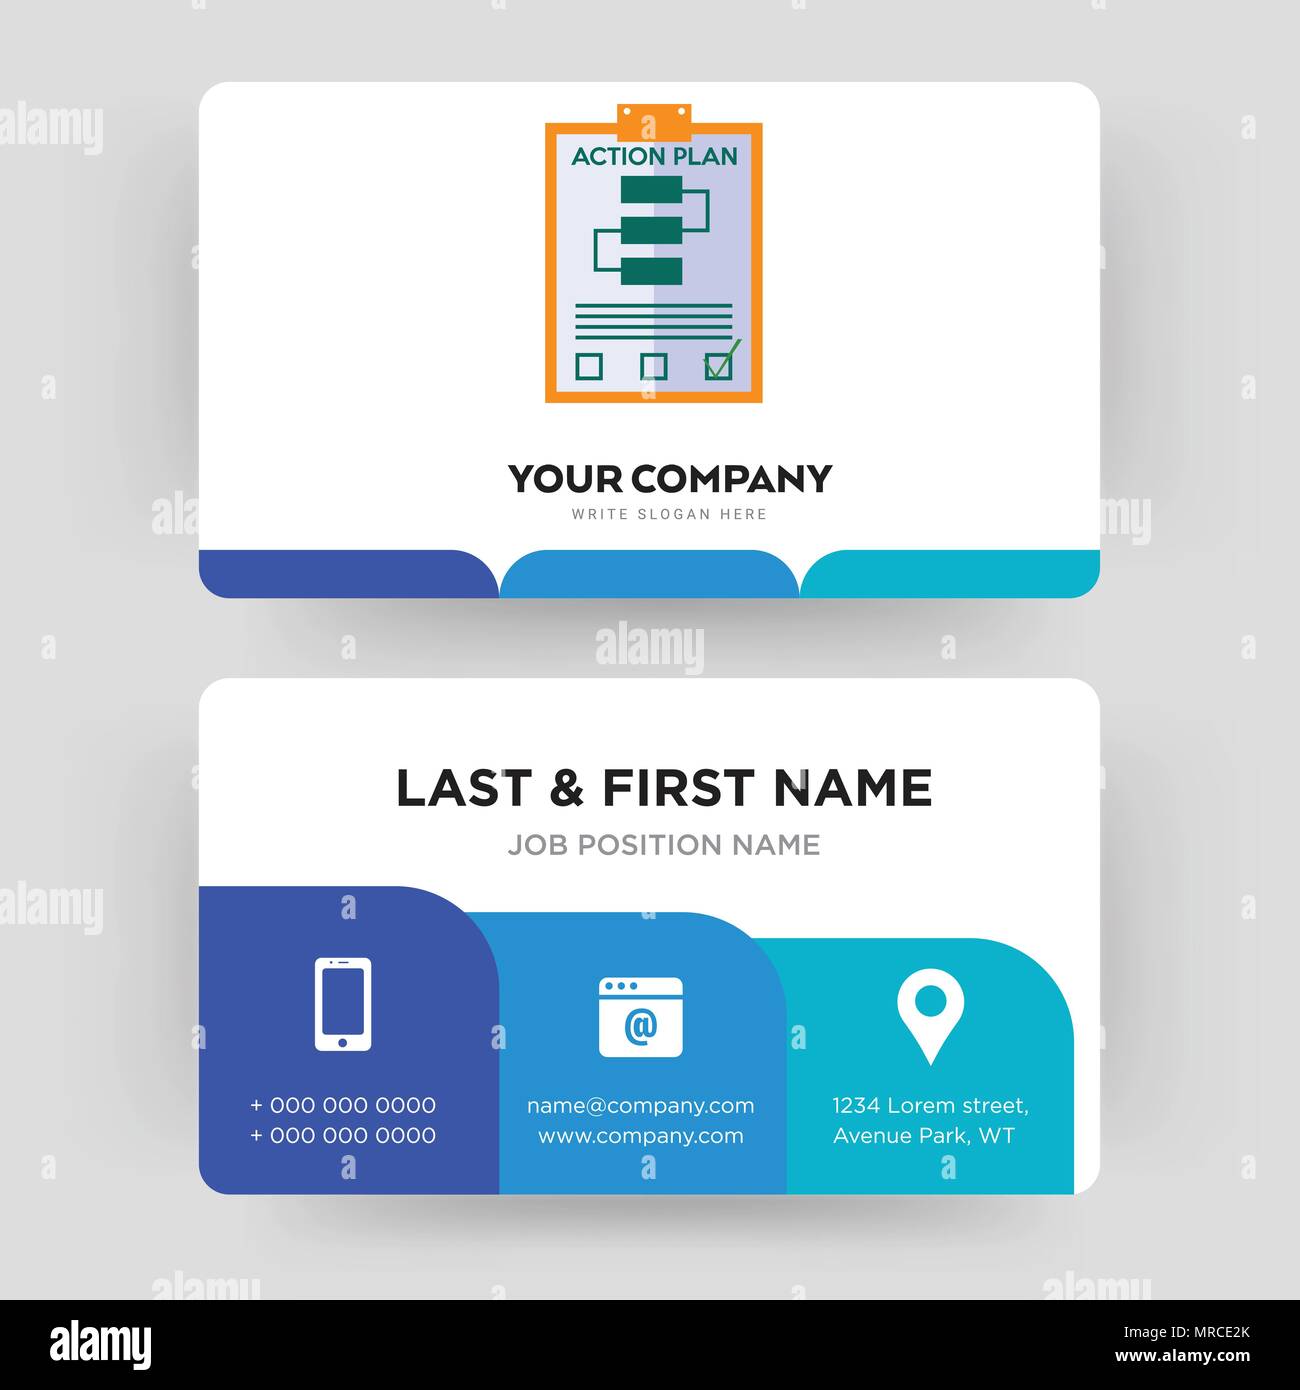 action plan, business card design template, Visiting for your